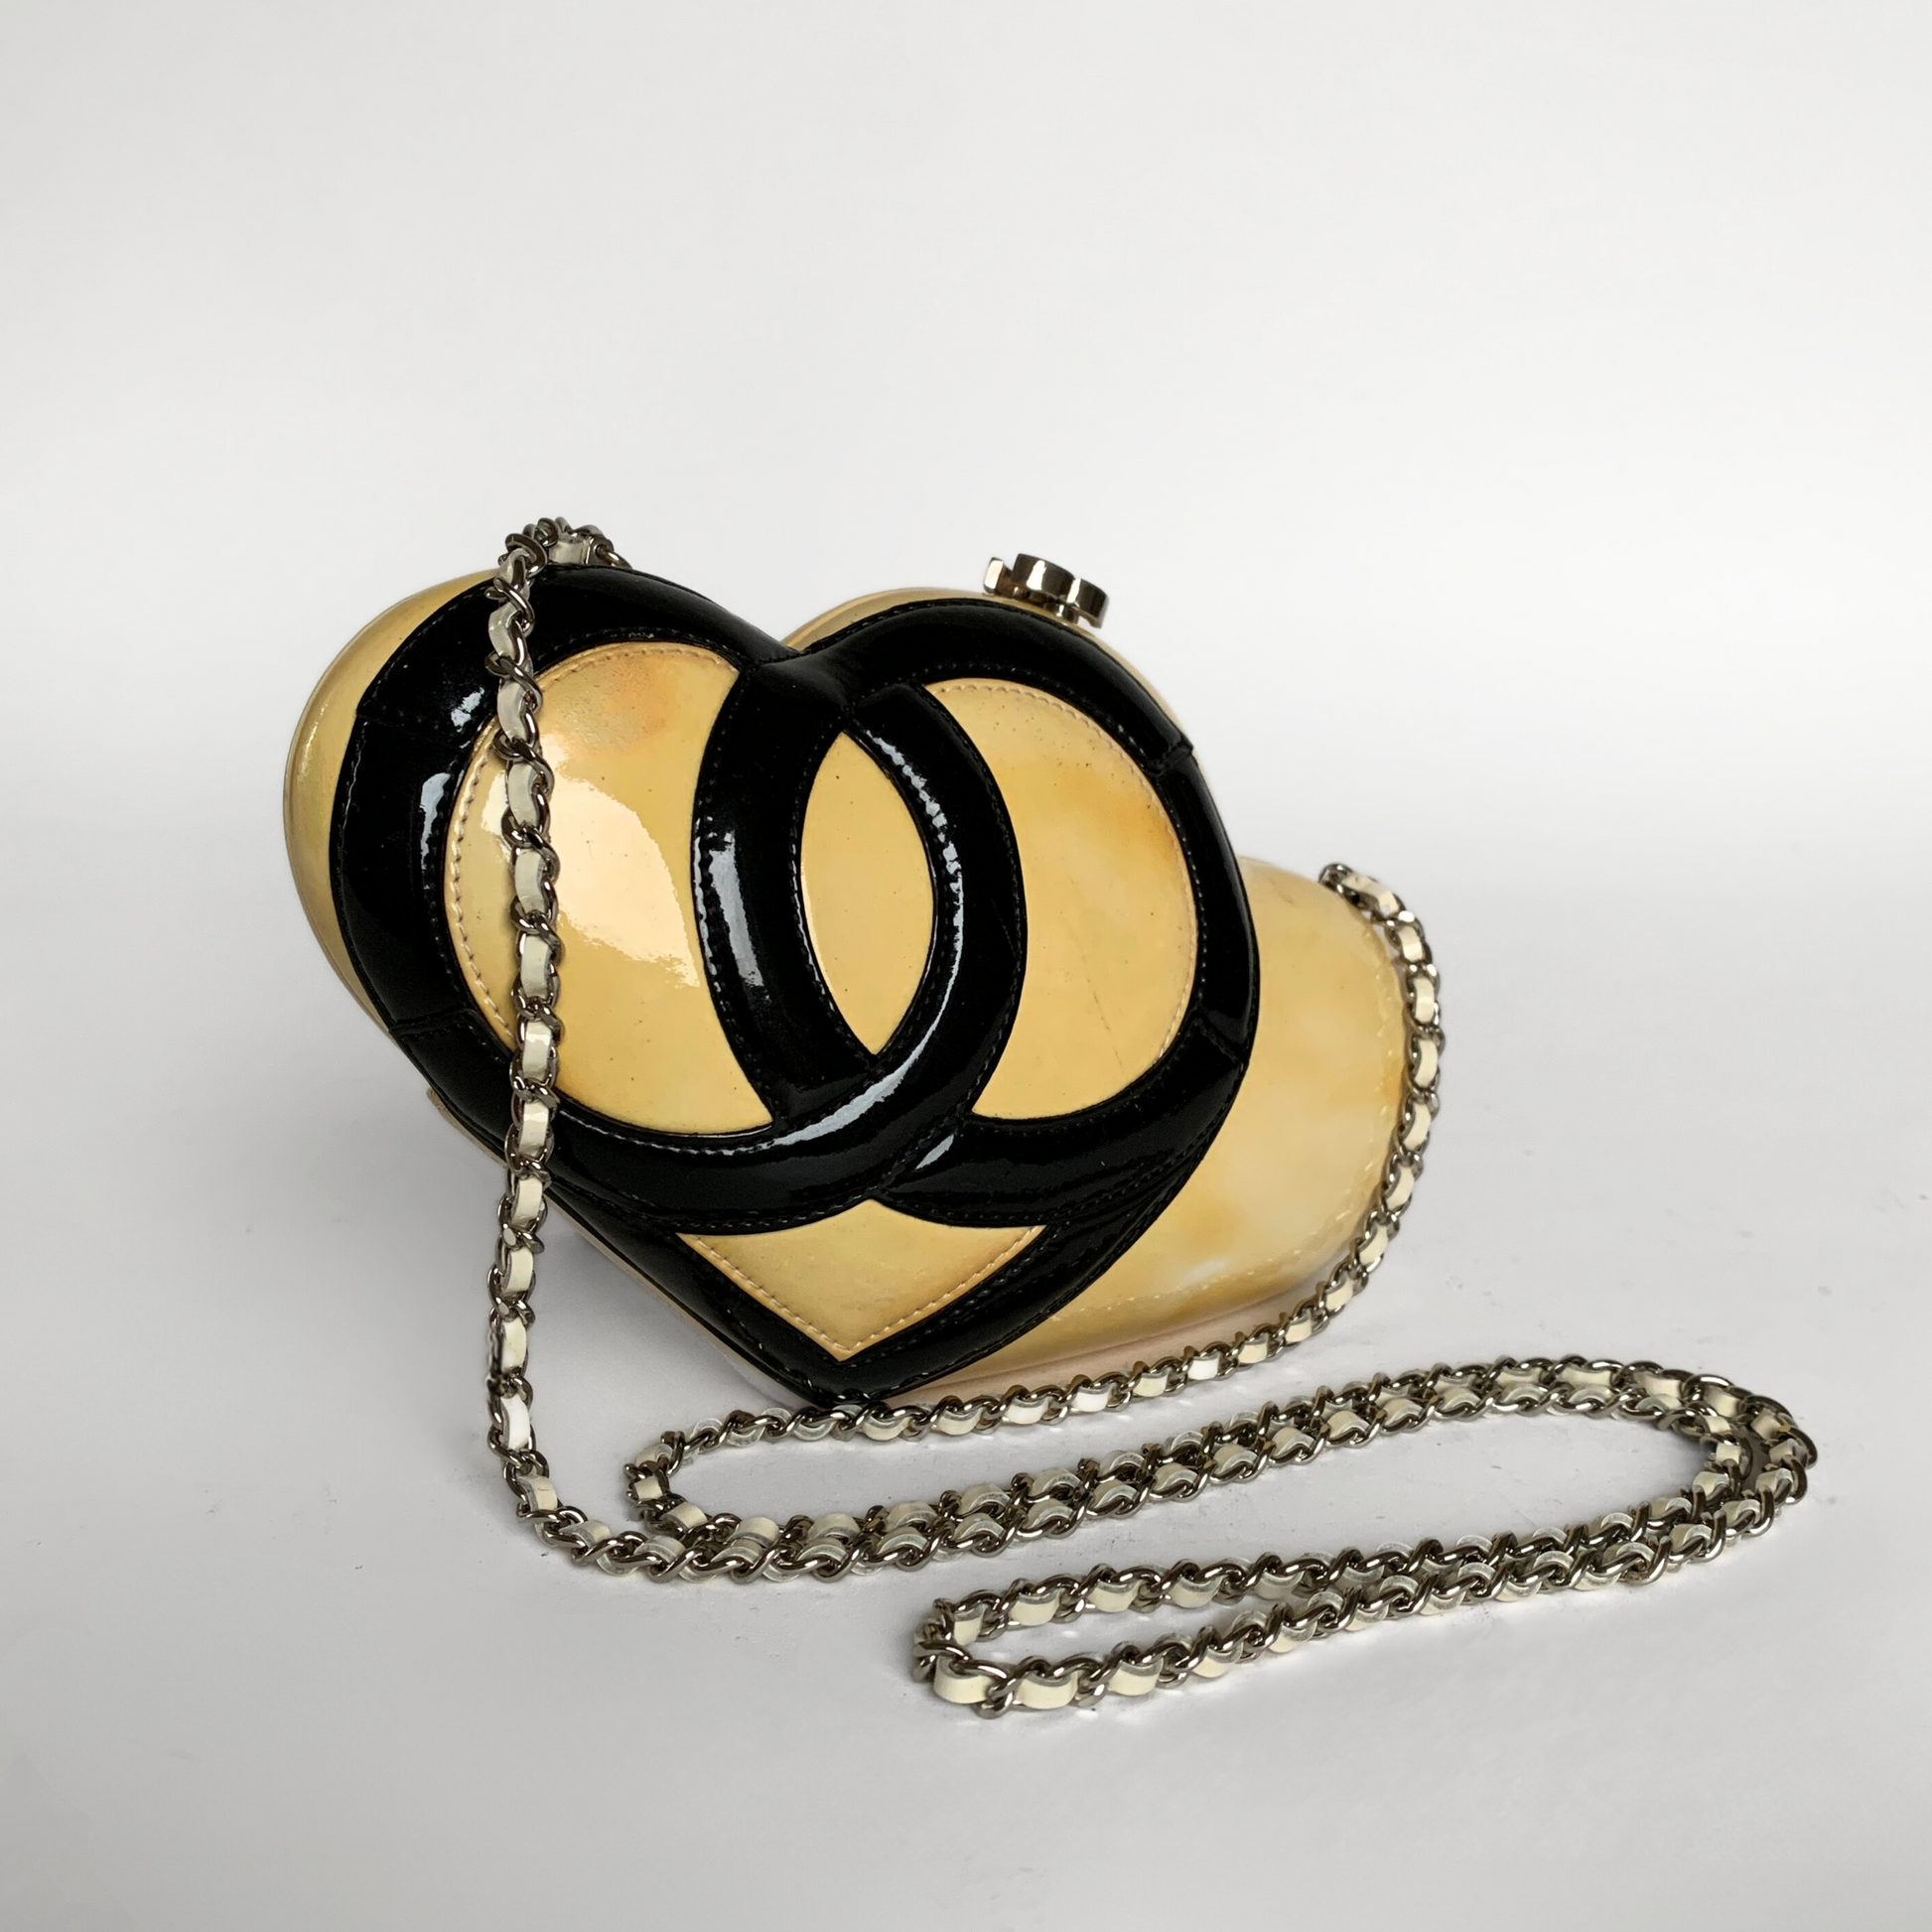 Chanel Chanel Heart Shoulder Bag Patent Leather (Limited Edition) - Crossbody bags - Etoile Luxury Vintage